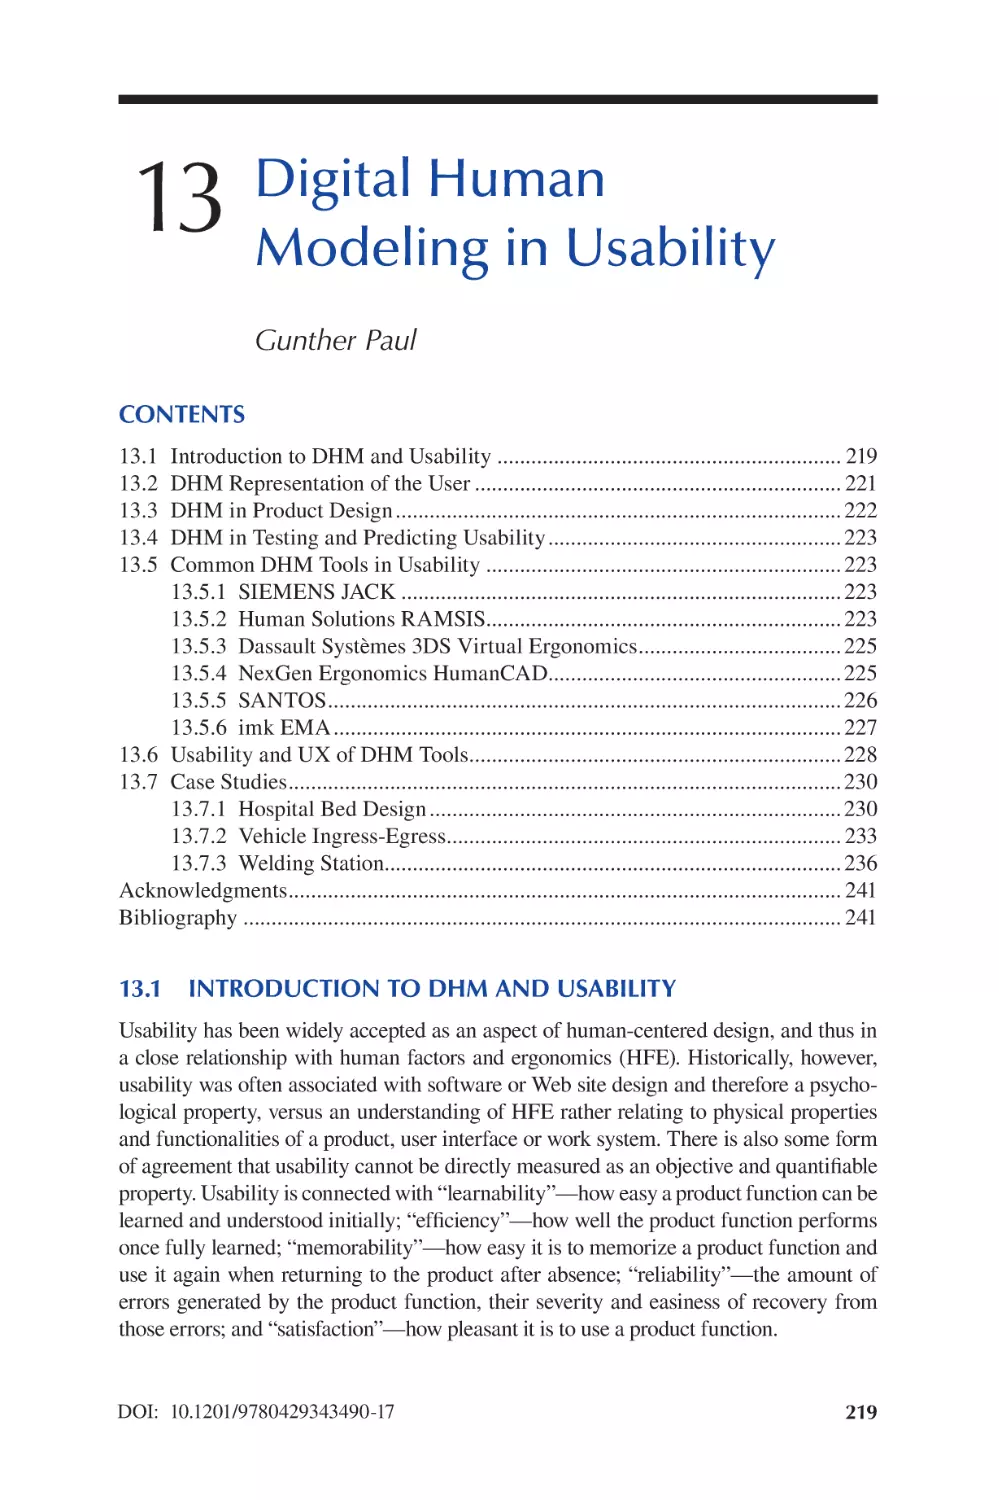 Chapter 13 Digital Human Modeling in Usability
13.1 Introduction to DHM and Usability